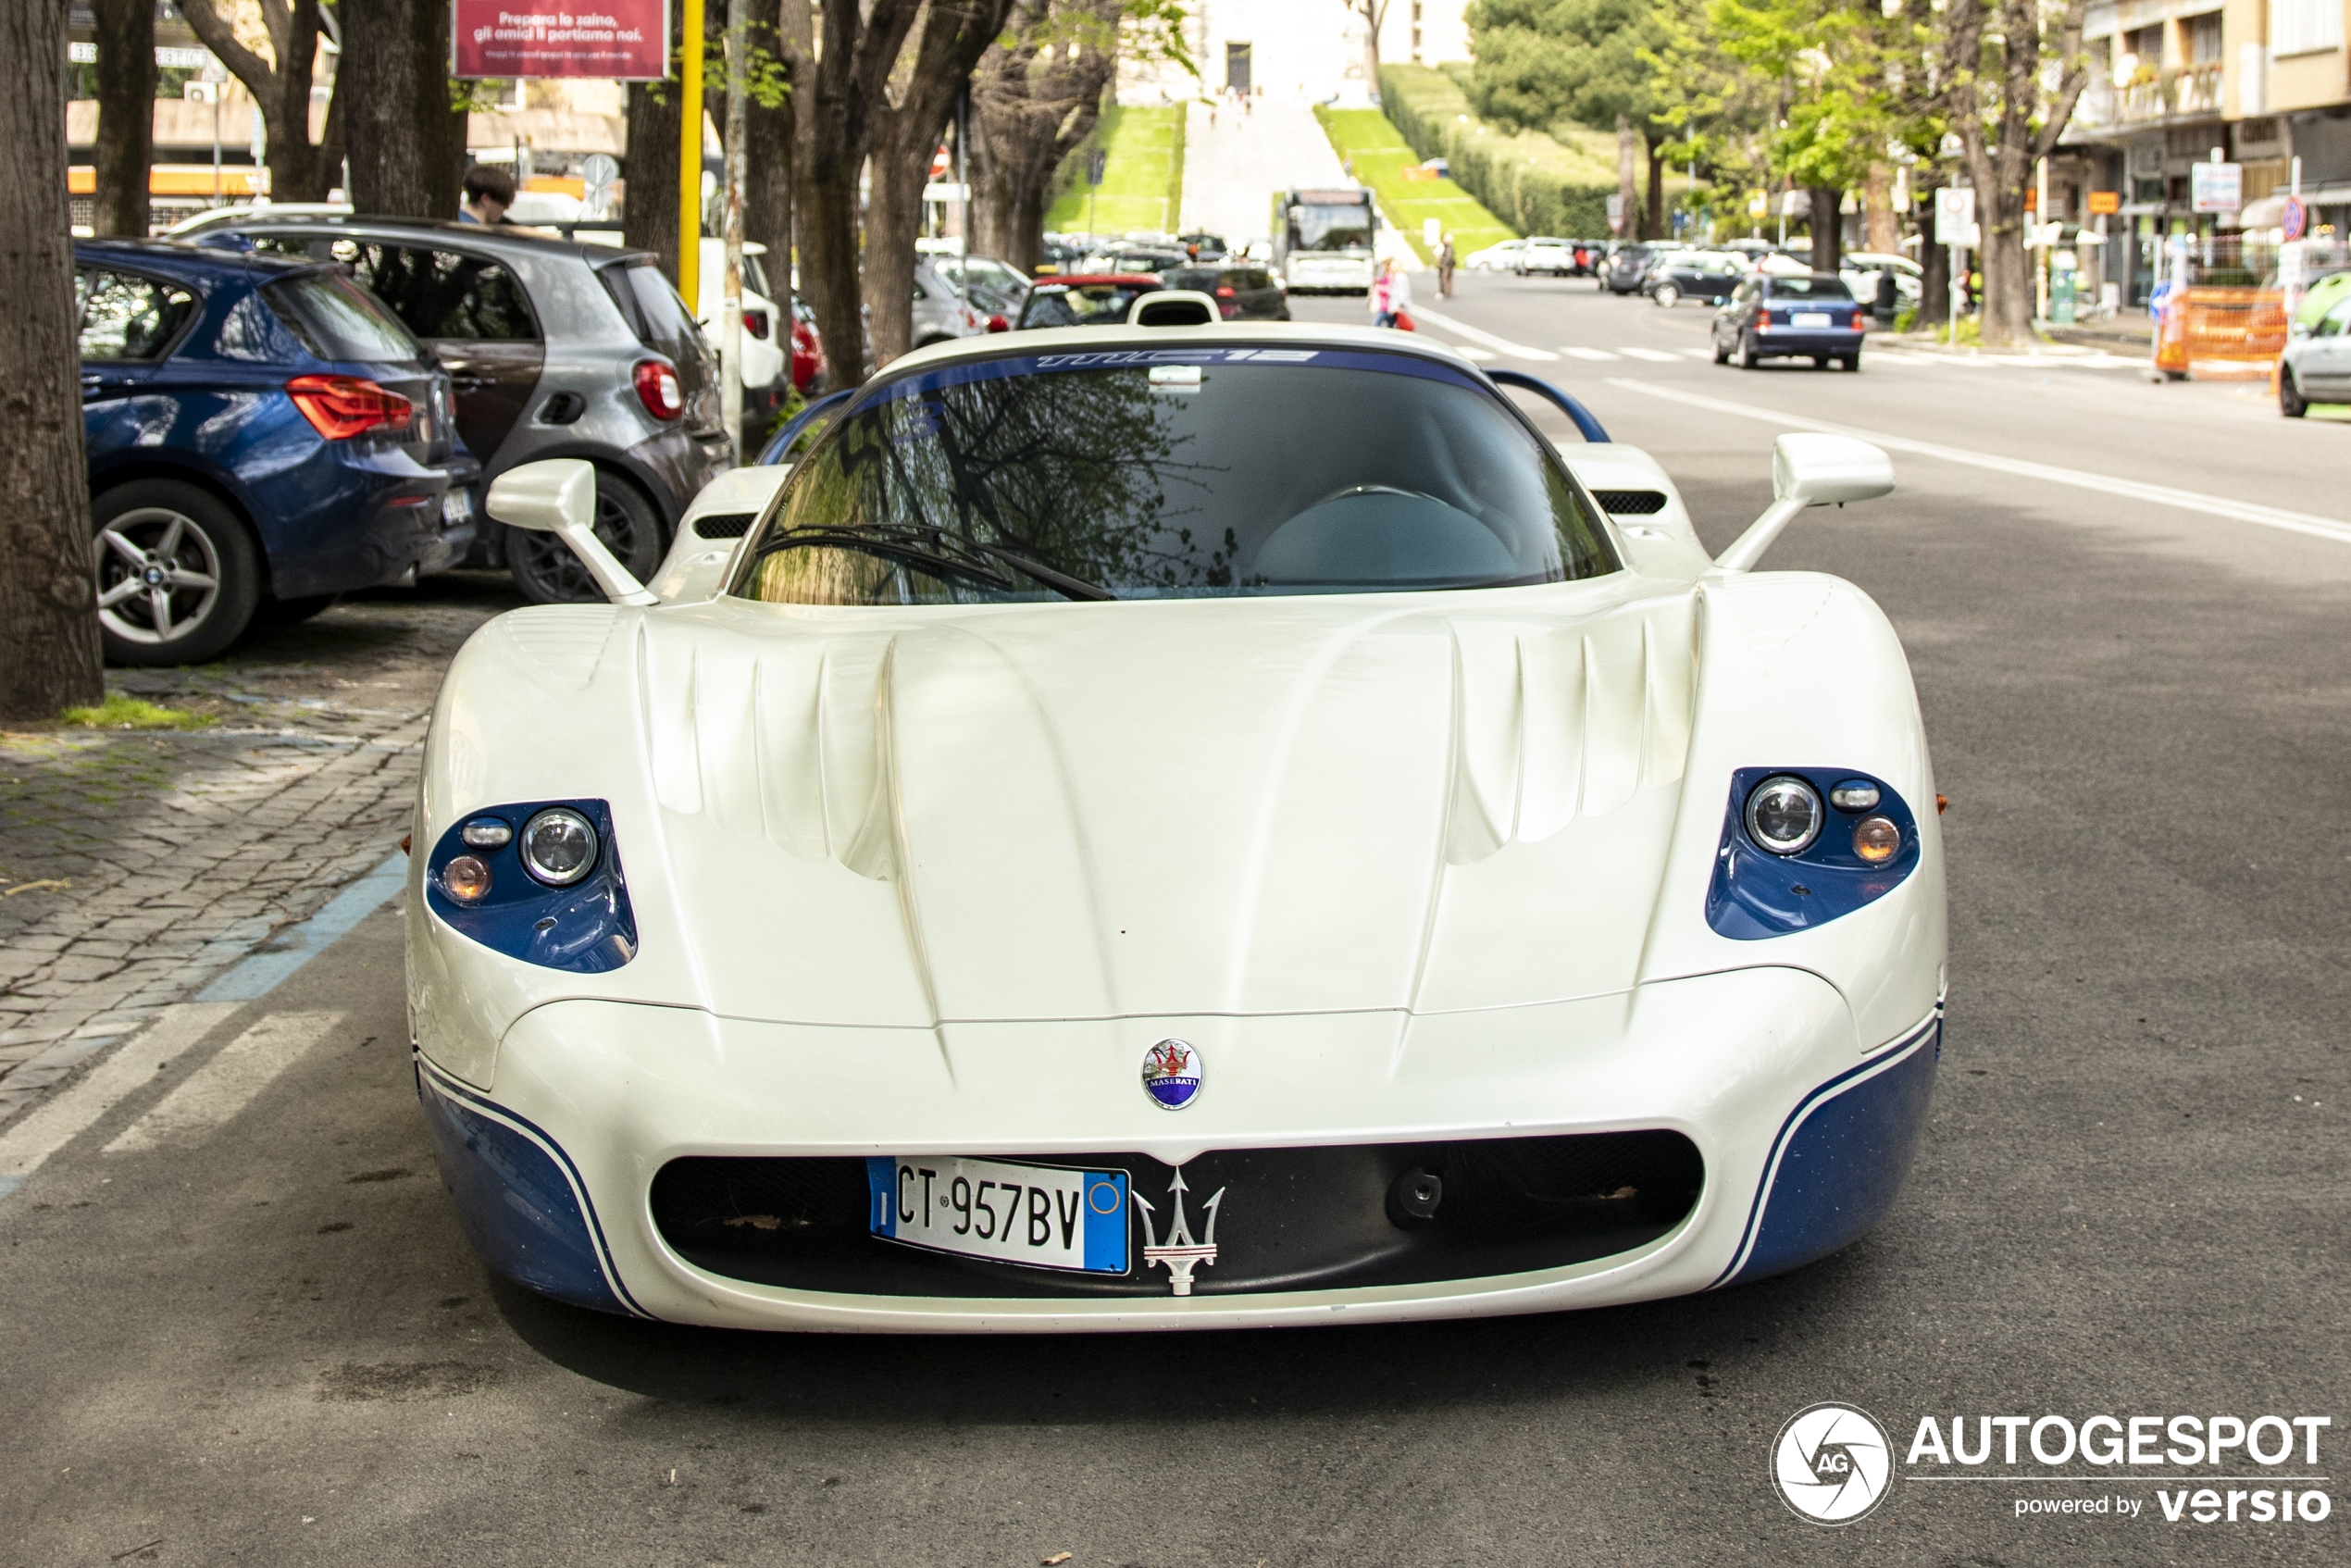 After 13 years this MC12 reappears in Rome